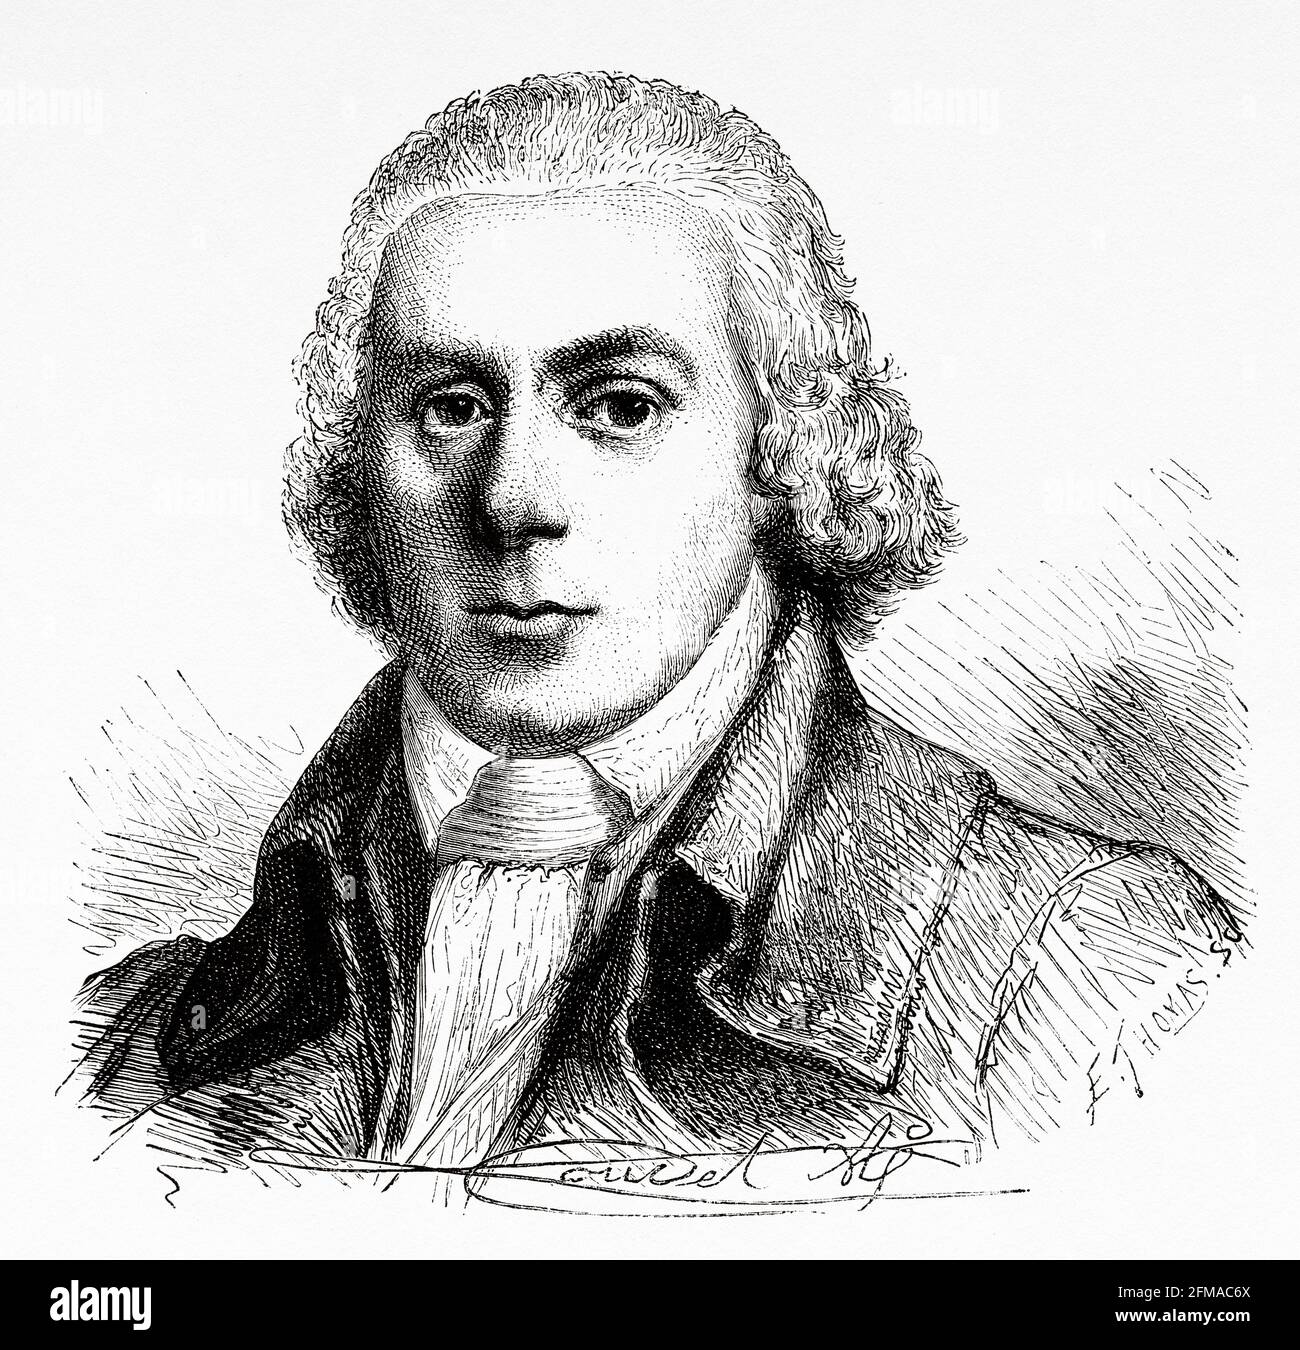 Portrait of Paul Jean Francois Nicolas viscount of Barras (1755-1829) General and French politician of the Revolution and the First Empire. France. Old 19th century engraved illustration from Histoire de la Revolution Francaise 1876 by Jules Michelet (1798-1874) Stock Photo